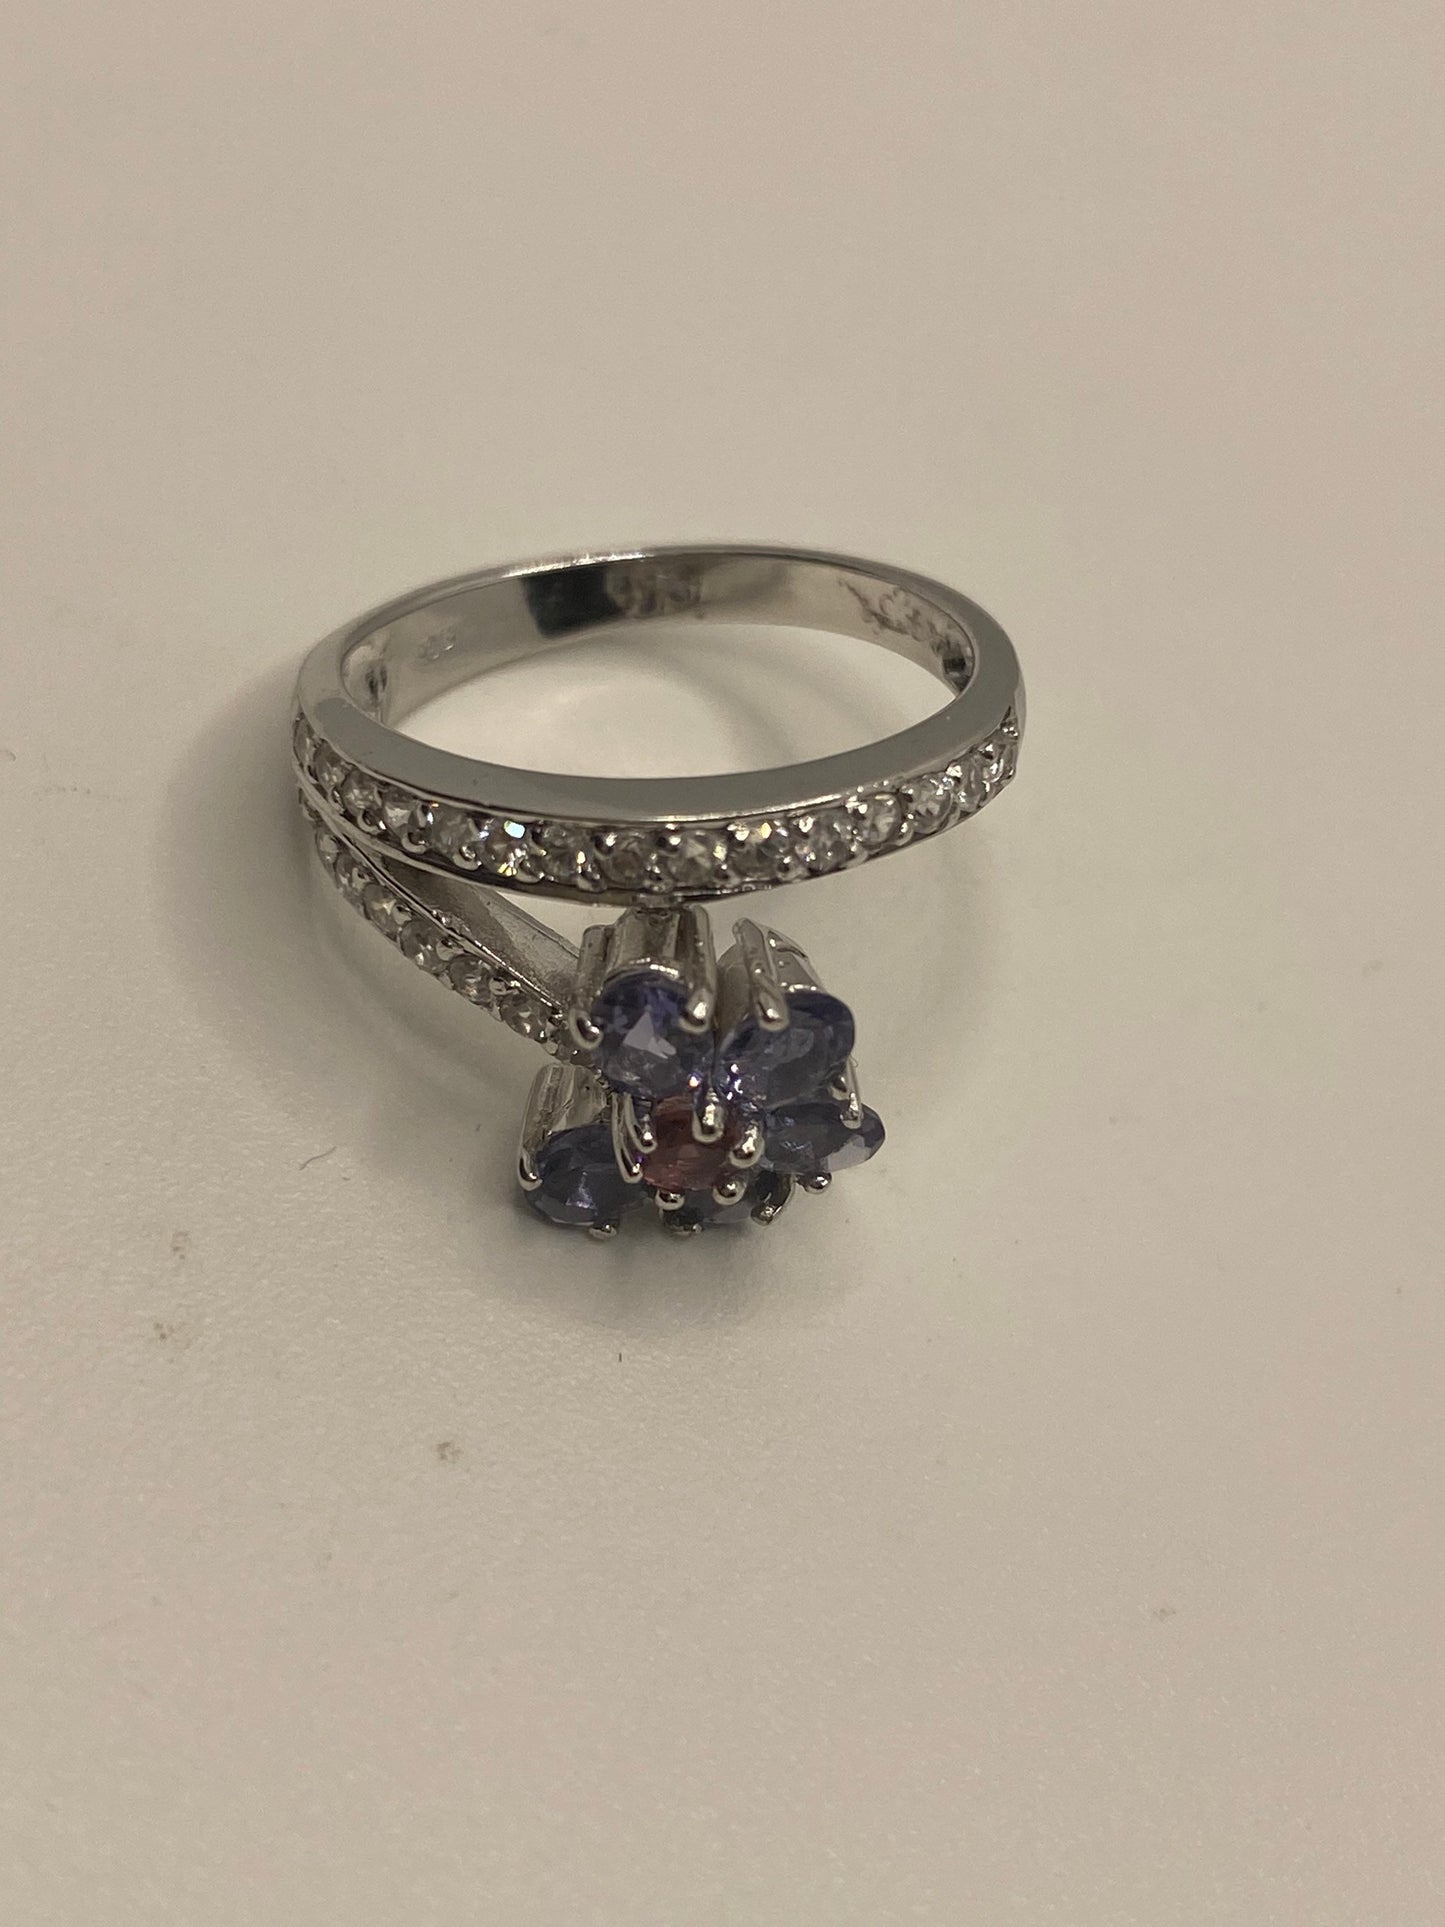 Vintage Blue Tanzanite Setting 925 Sterling Silver Gothic Cocktail Ring Size 7